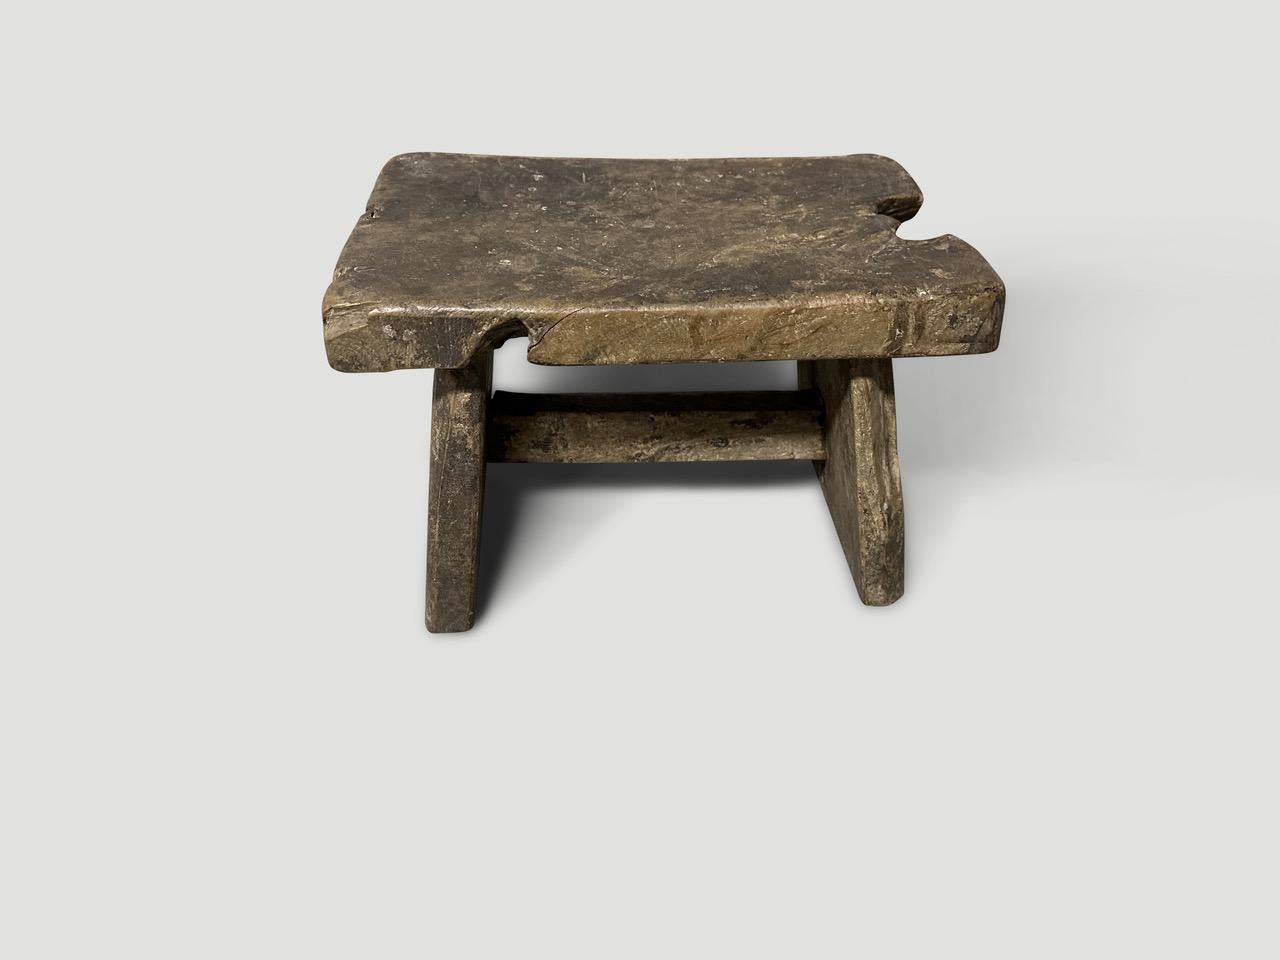 Antique hand made side table or stool. Celebrating the cracks and crevices and all the other marks that time and loving use have left behind. Circa 1950

This low side table or stool was hand made in the spirit of Wabi-Sabi, a Japanese philosophy